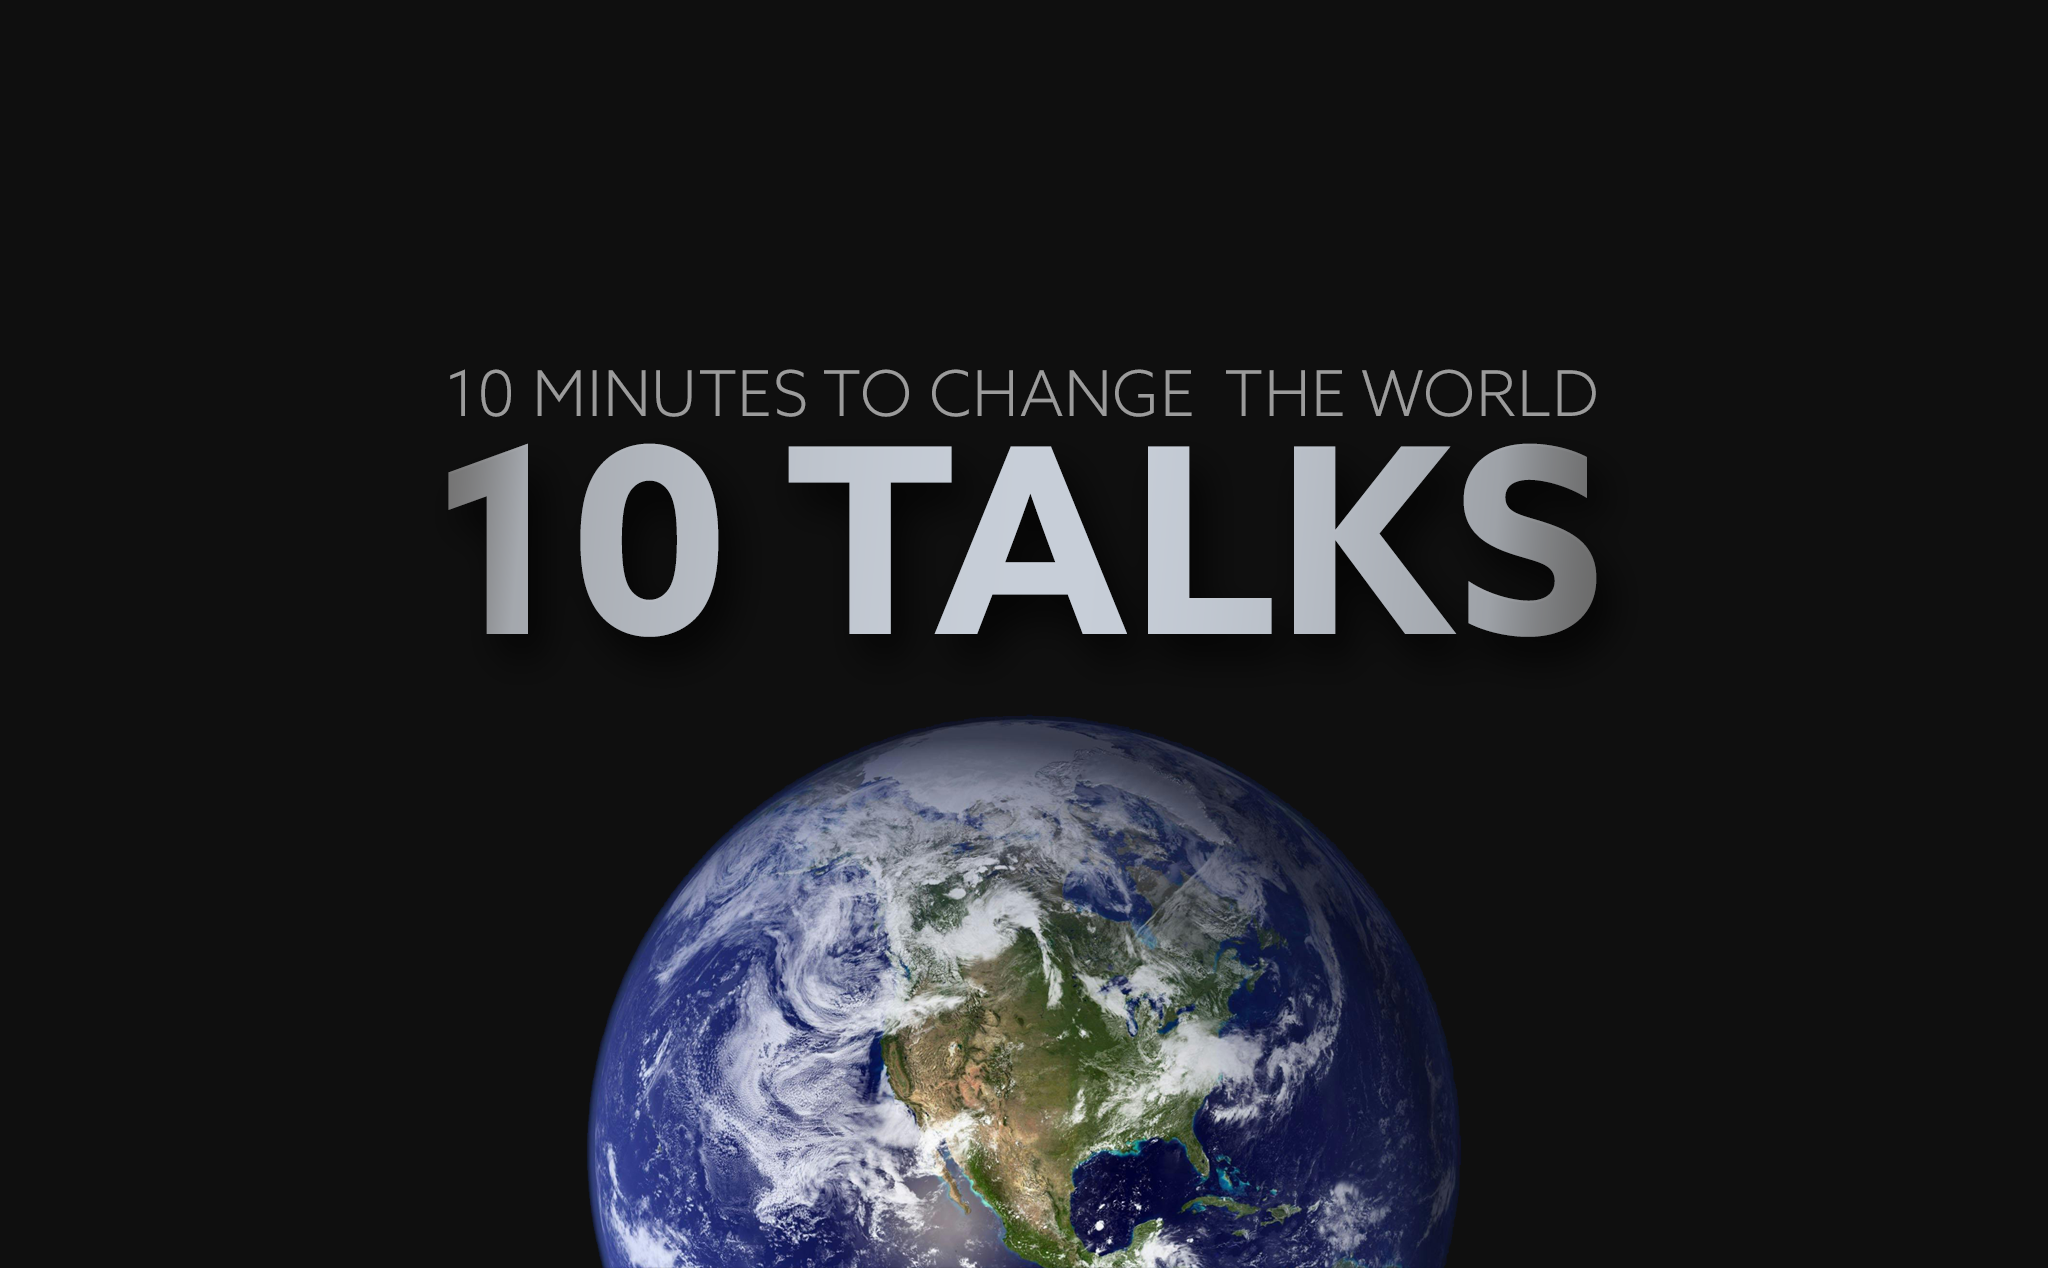 10 Talks - 10 Minutes to Change the World